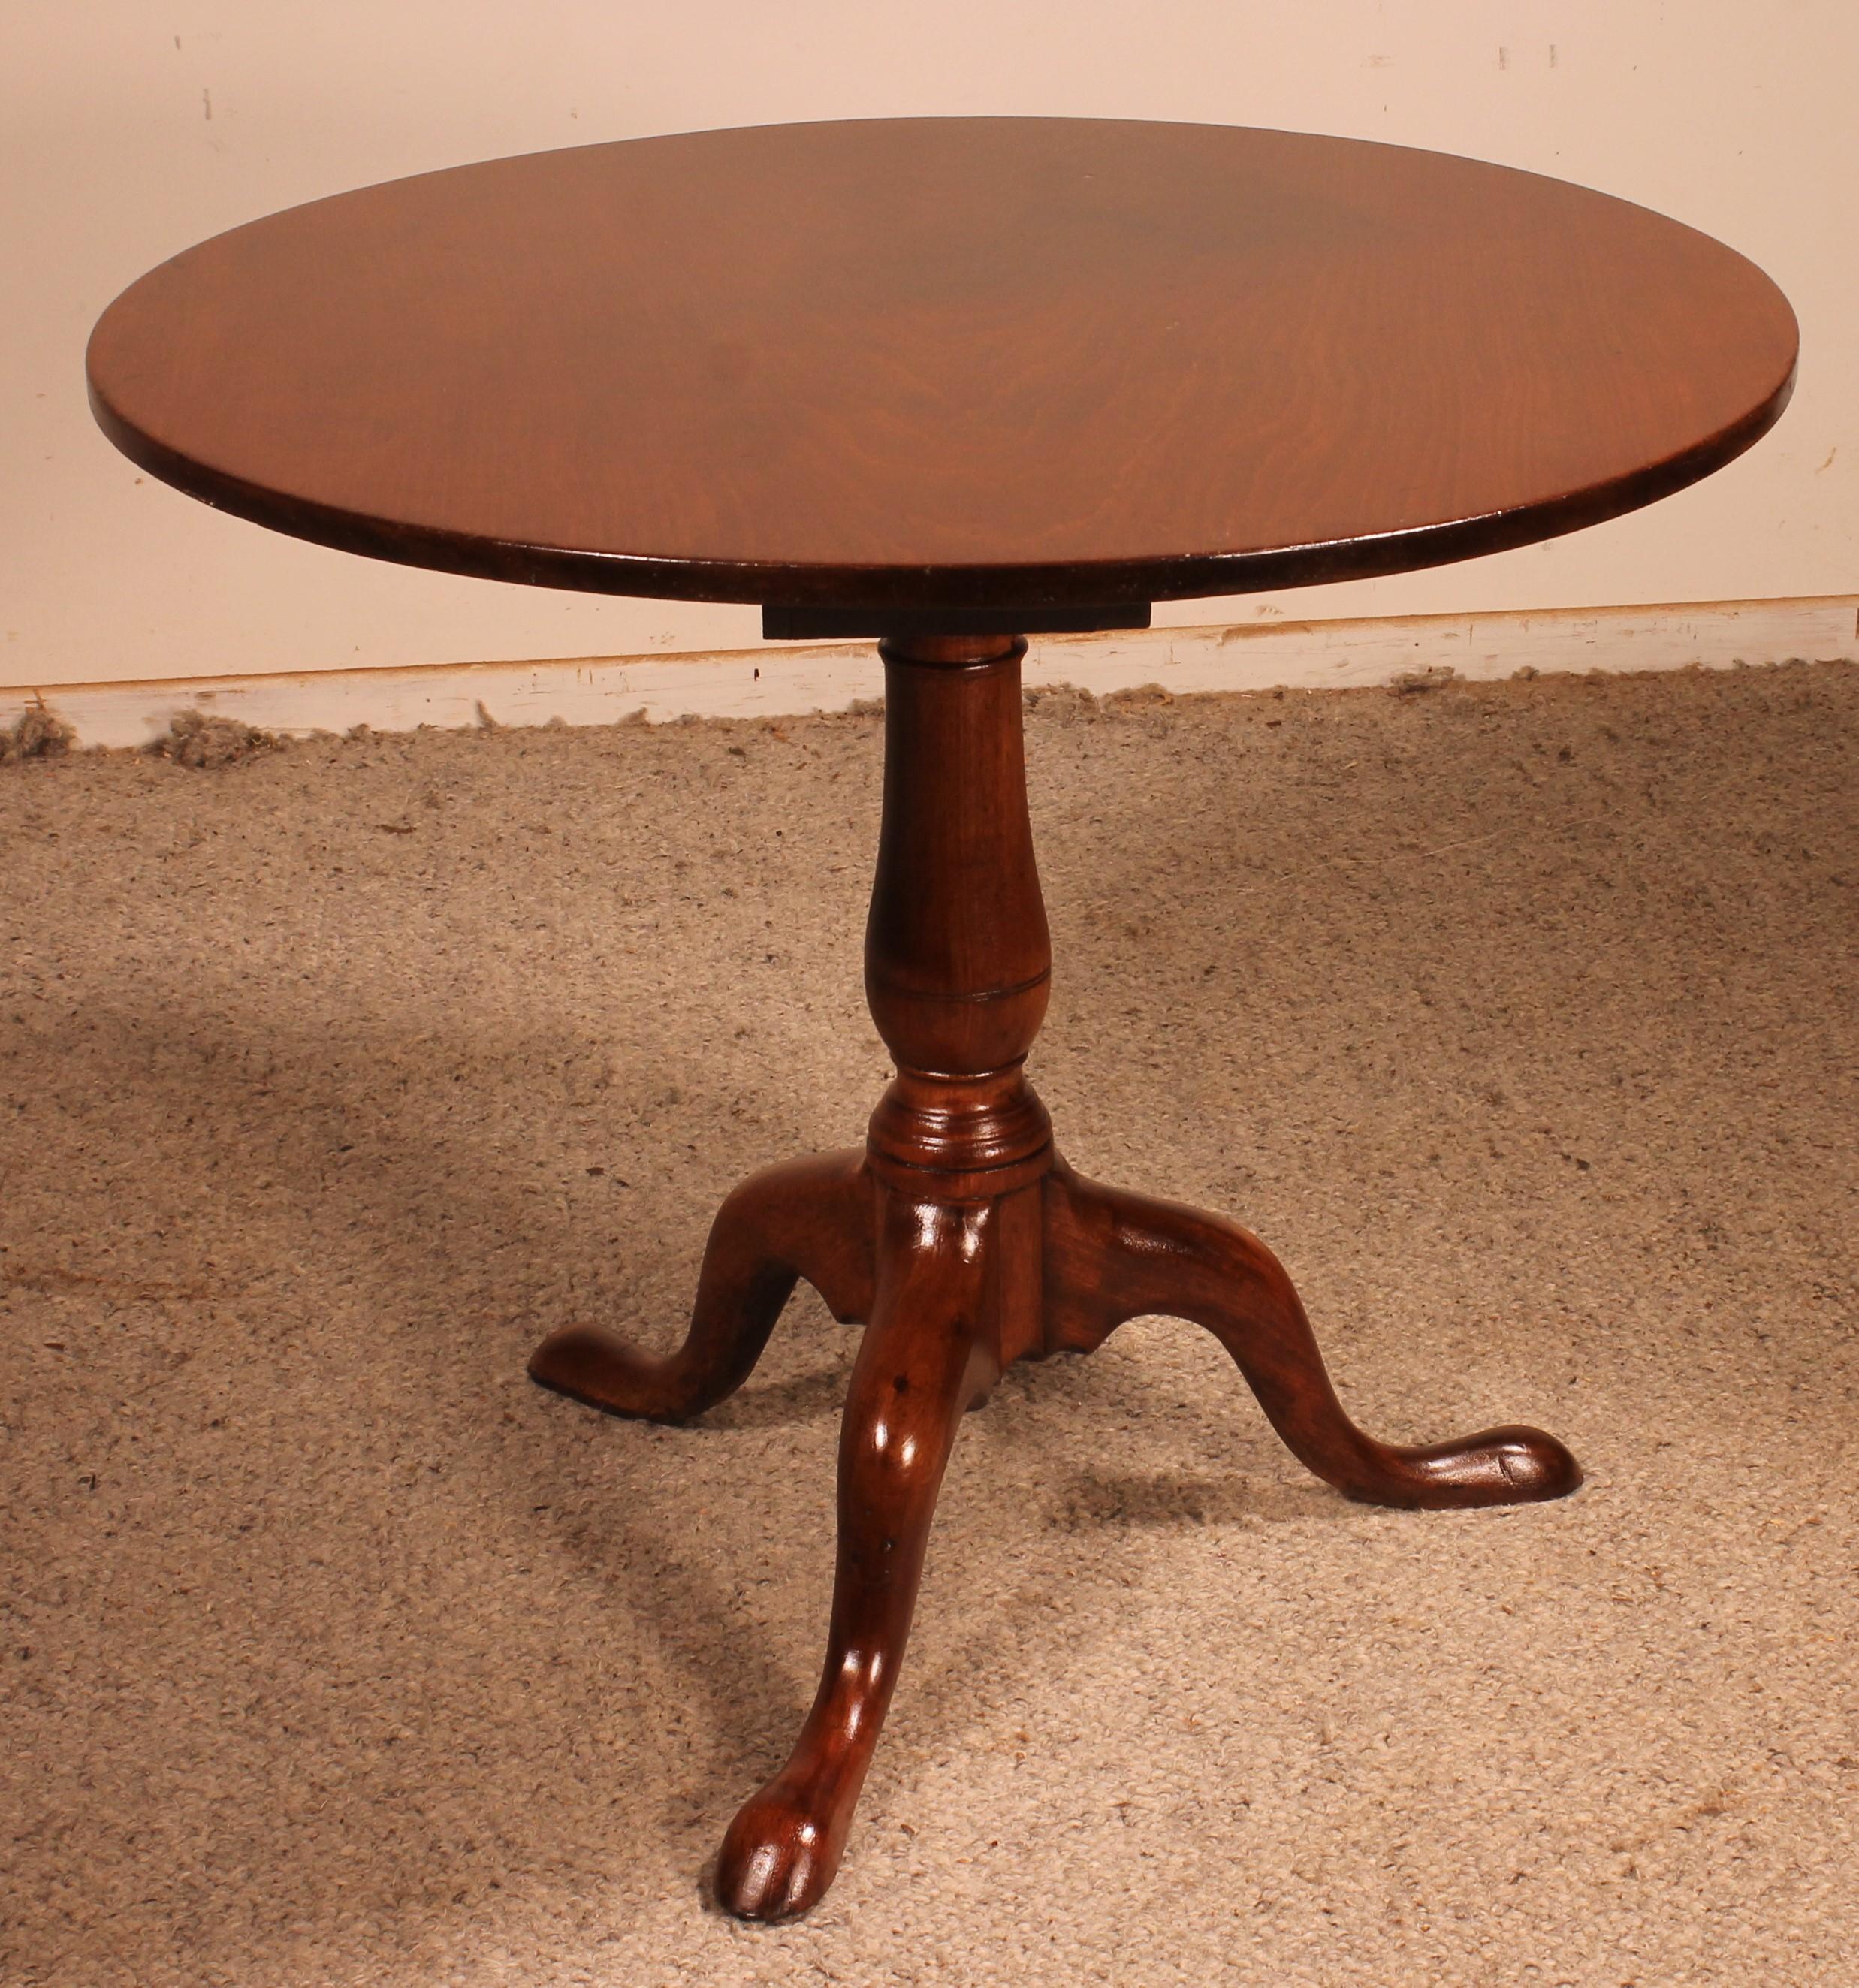 Elegant English pedestal table called tripod table in solid mahogany with a mechanism circa 1800

Superb one-piece table top in solid mahogany with a diameter of 80cm.
Tripod base in solid mahogany

The pedestal table has a mechanism since the